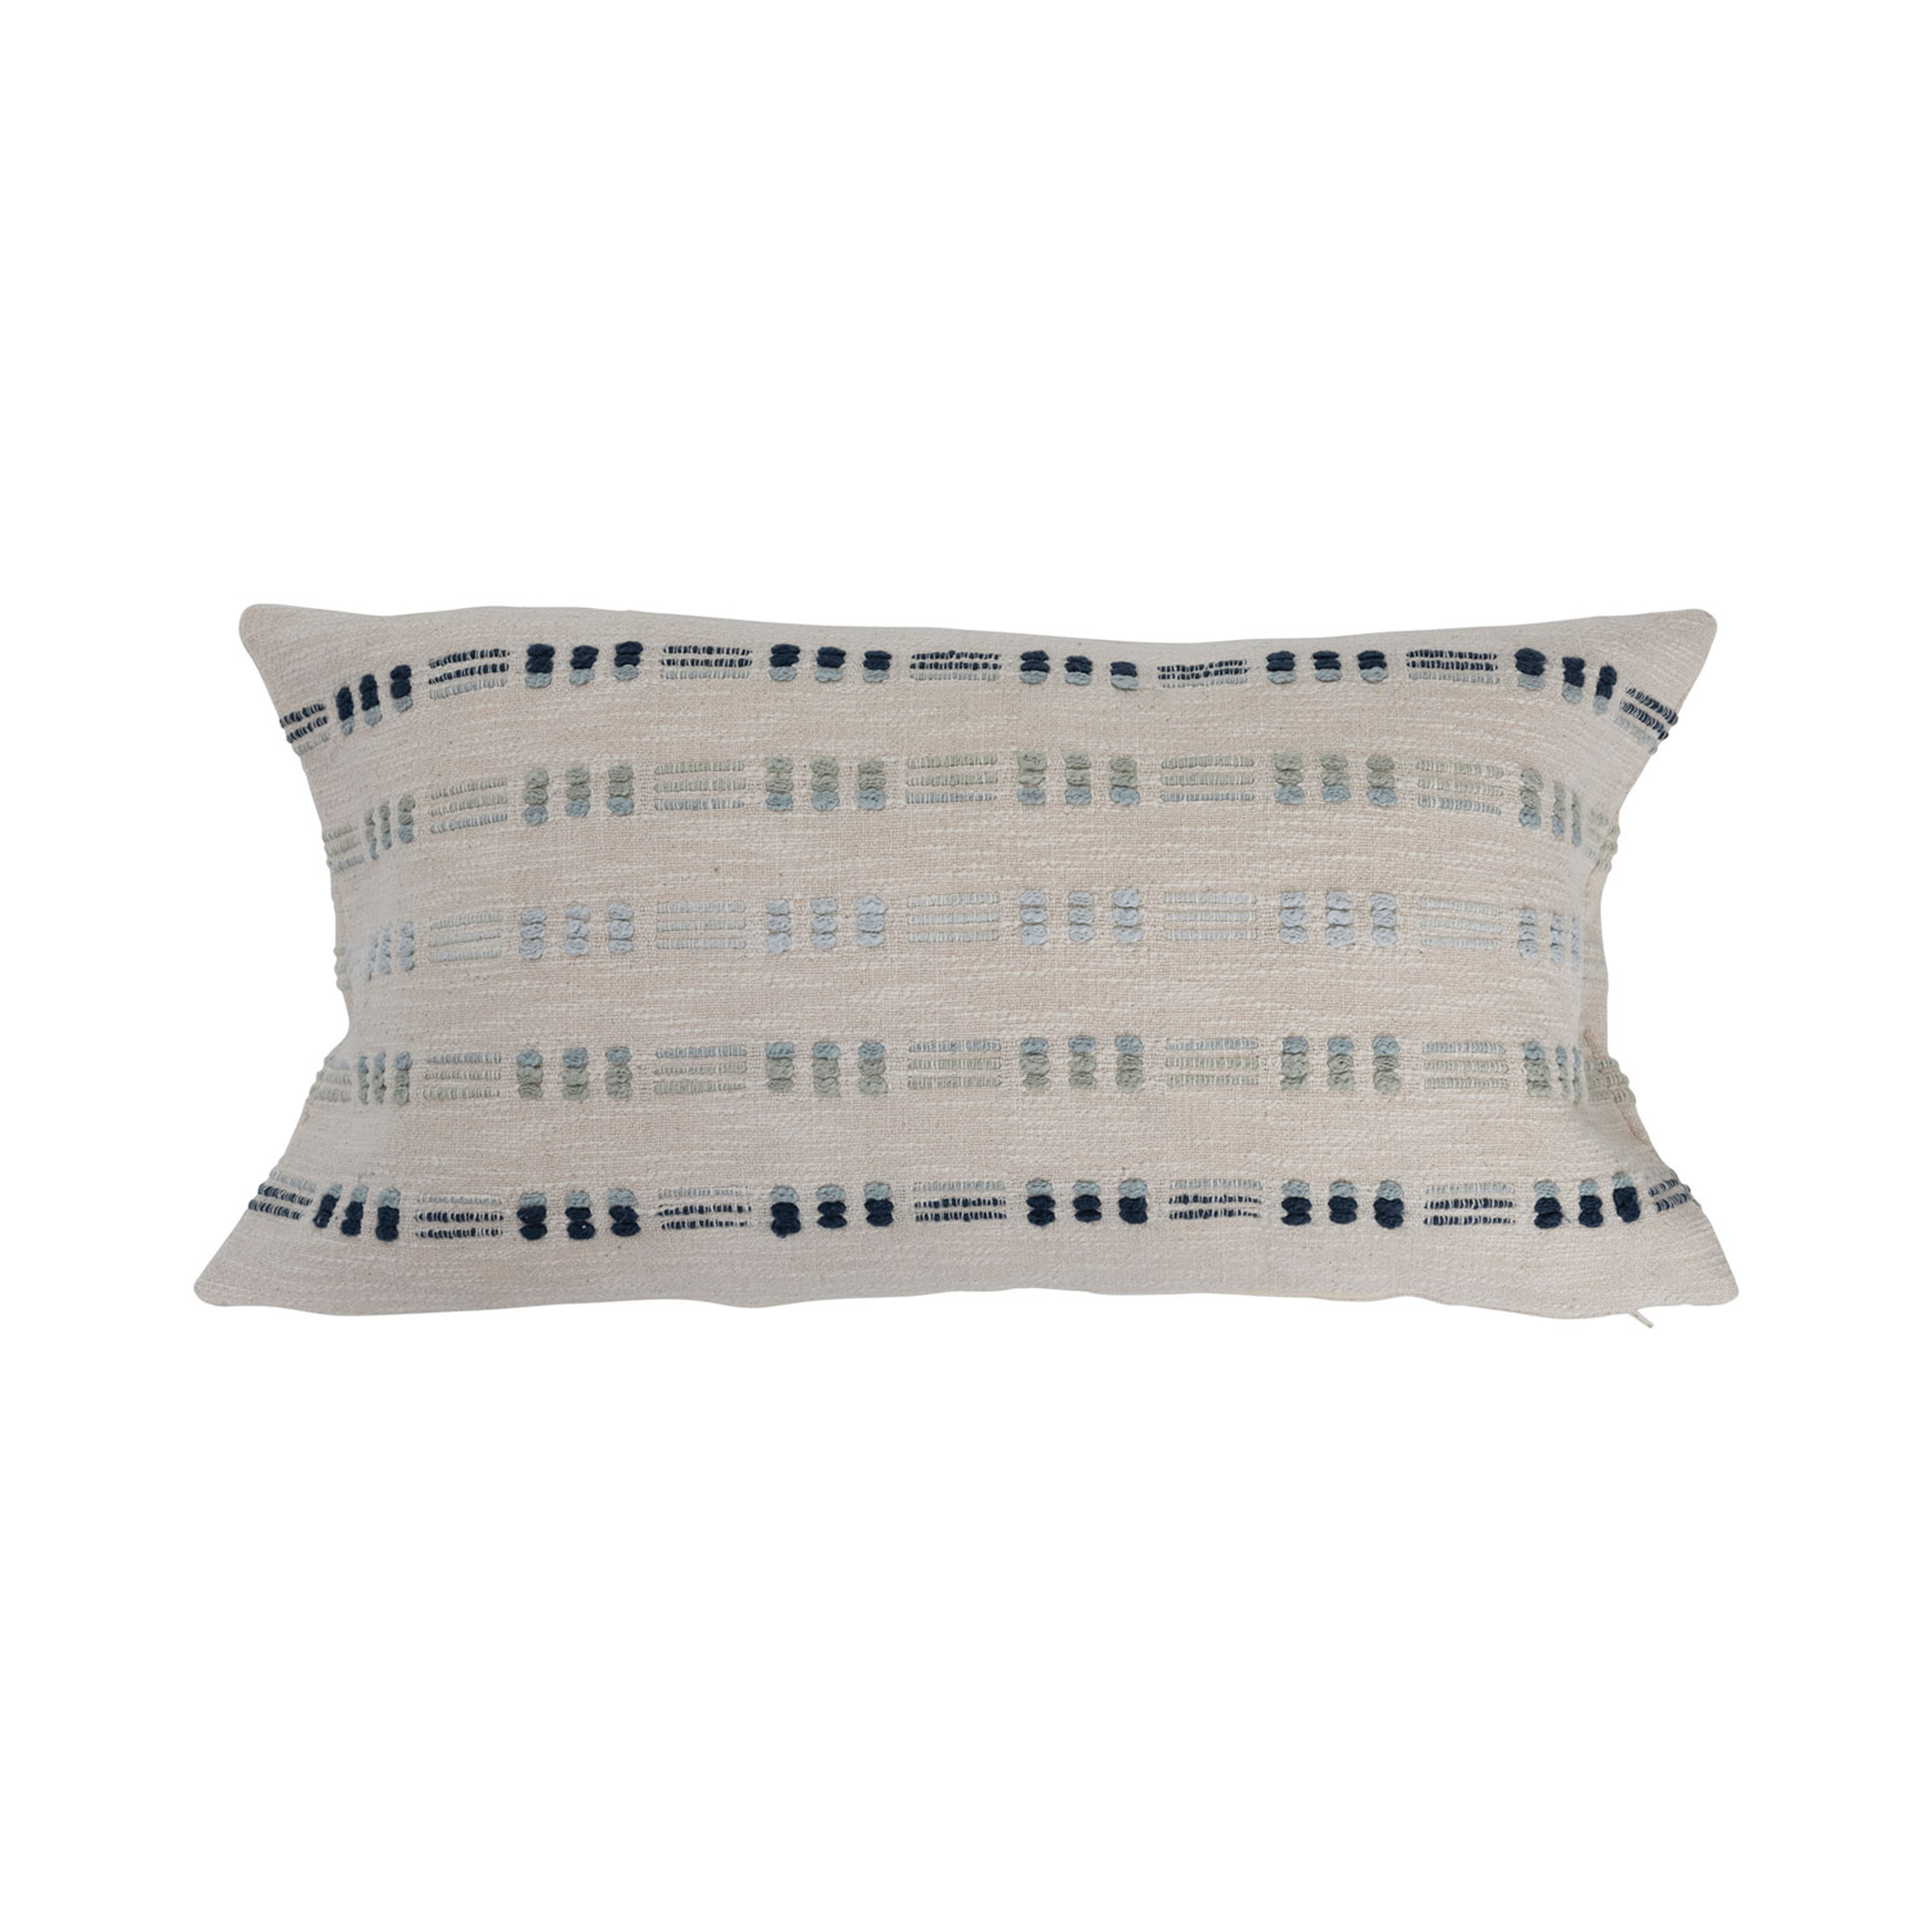 Woven Cotton Lumbar Pillow with Embroidery - Nomad Home